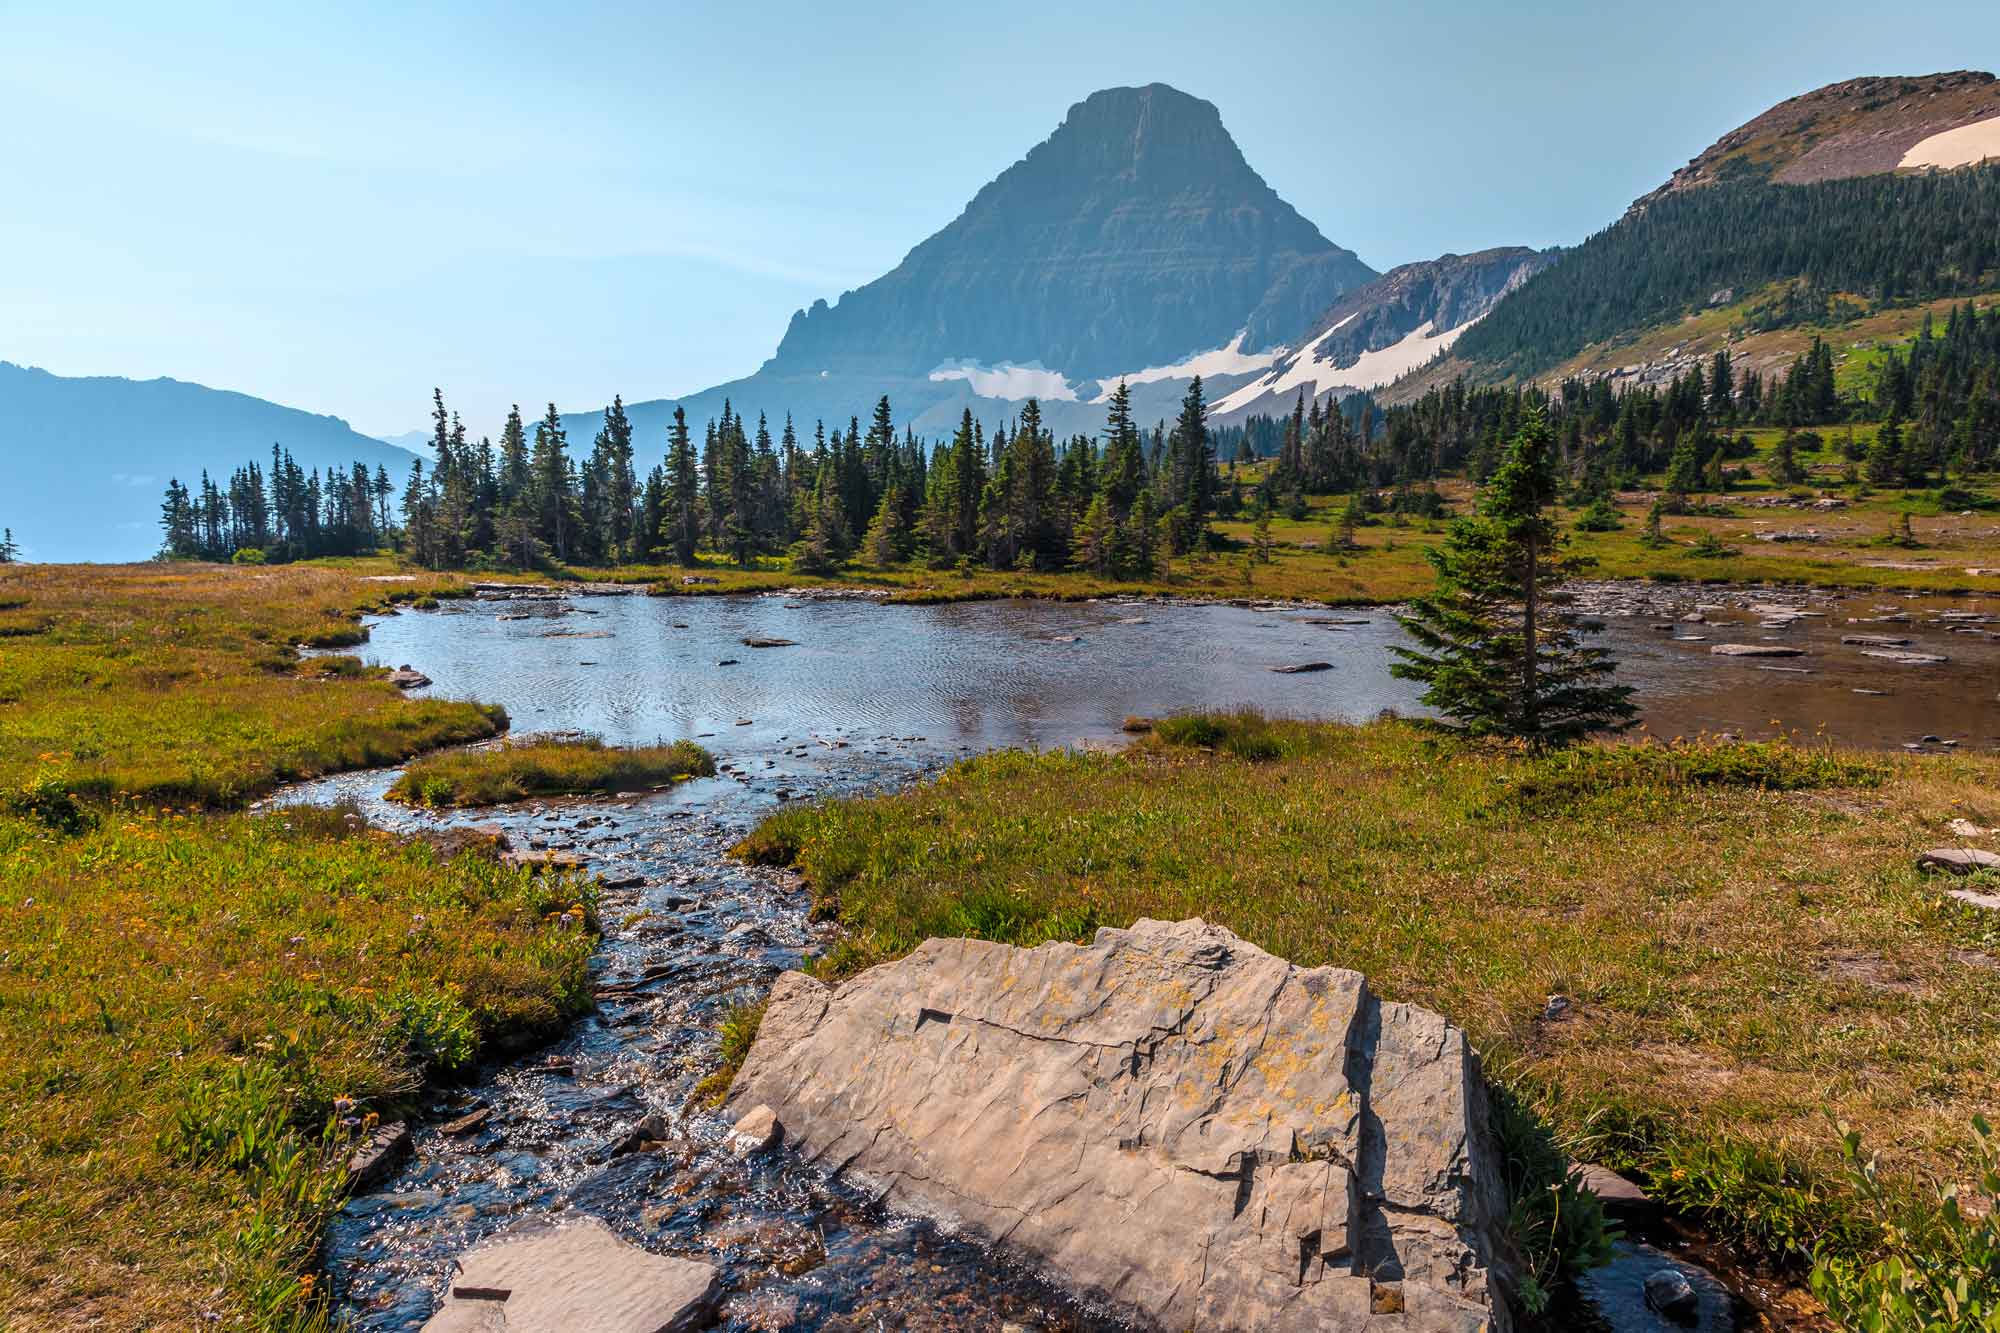 Crown of the Continent ecosystem: stream flows into pond with coniferous trees in midground and iconic mountain peak in background